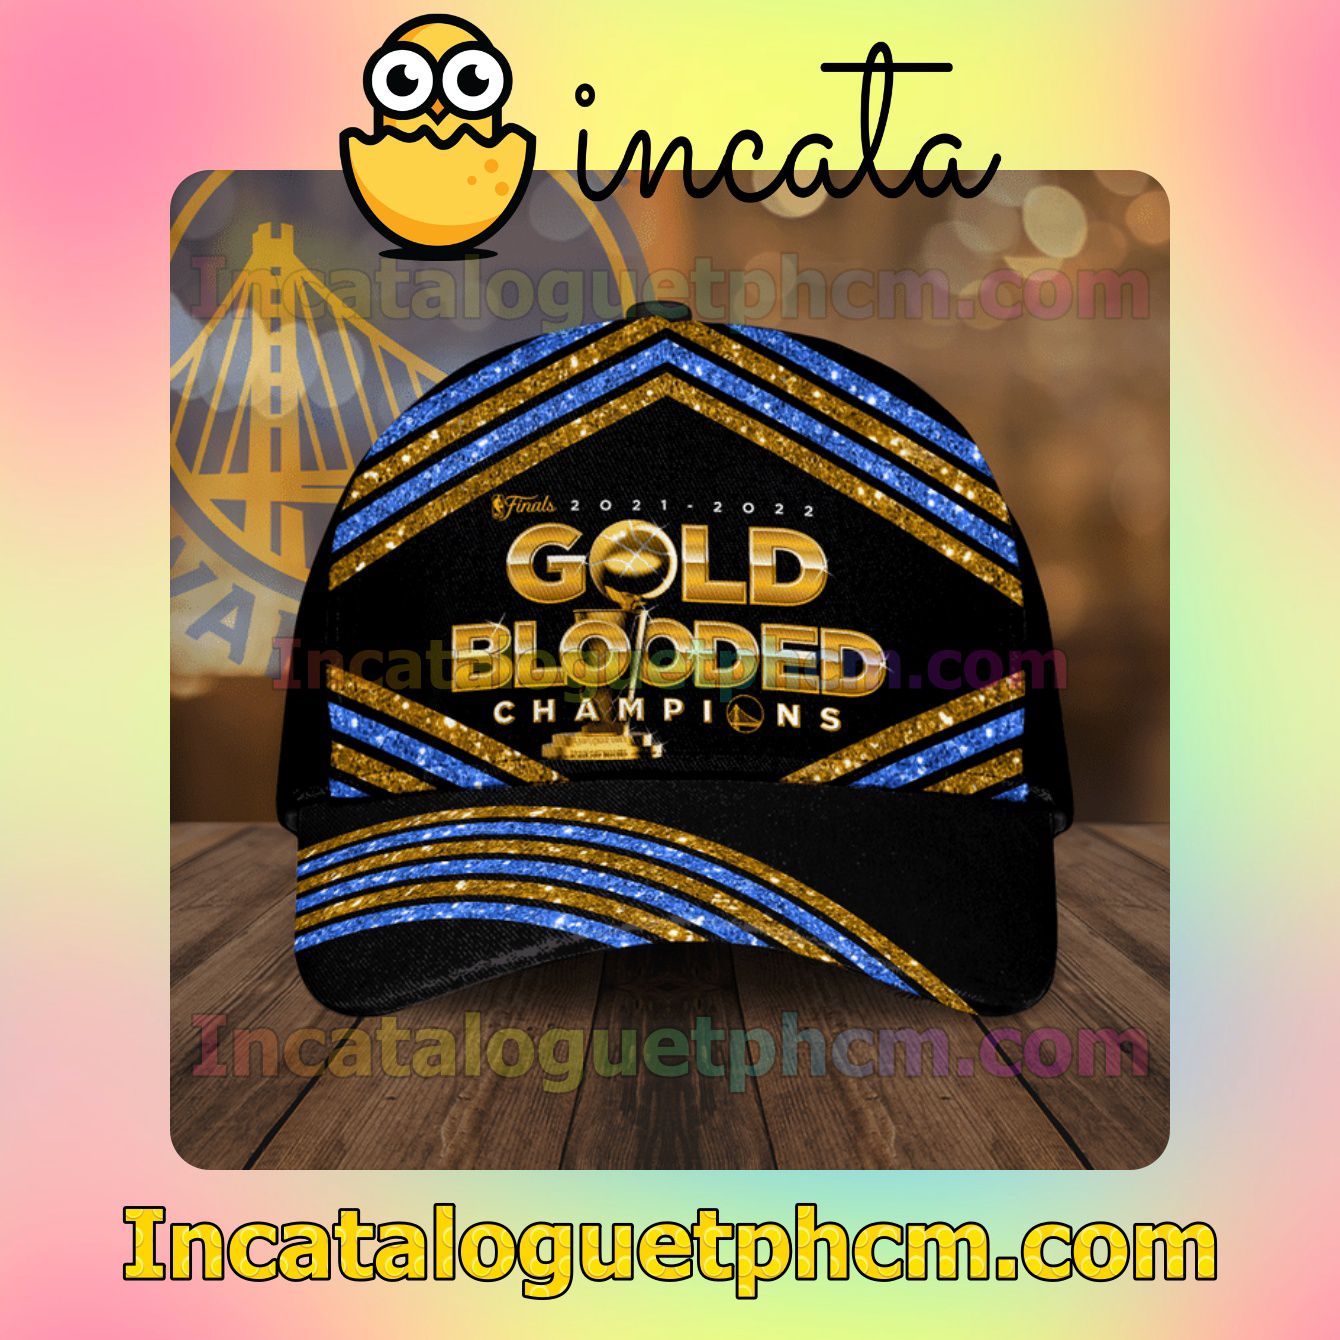 Amazing Finals 2021 2022 Gold Blooded Champions Glitter Stripes Classic Hat Caps Gift For Men